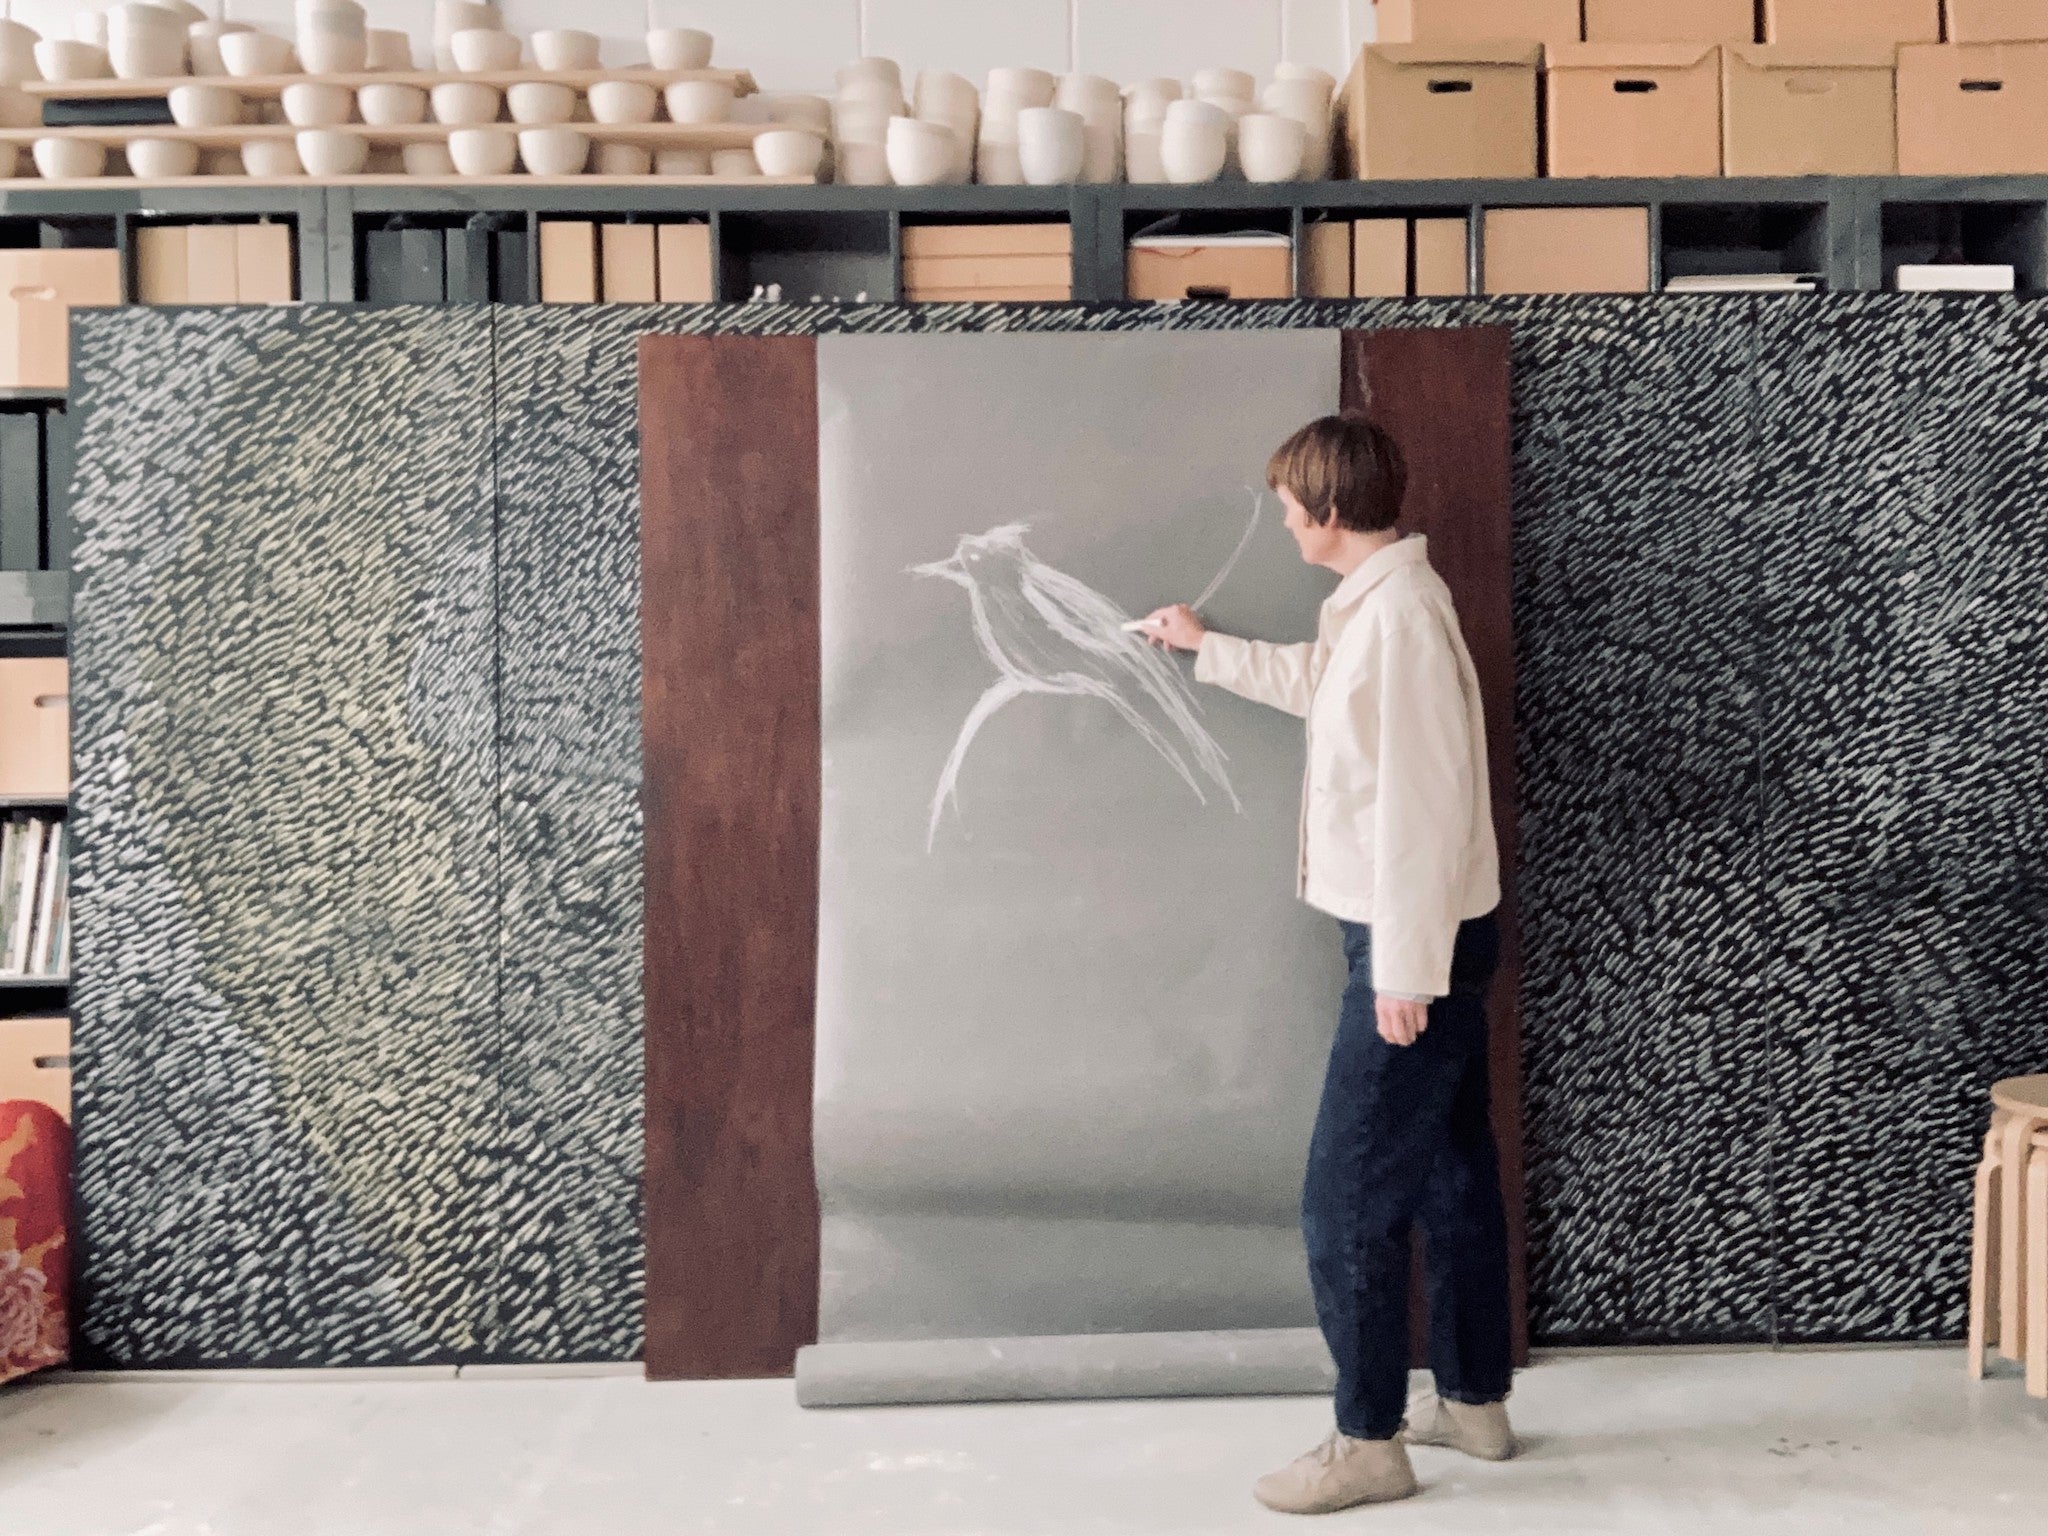 Clare Twomey in her studio, drawing for The Wild Escape